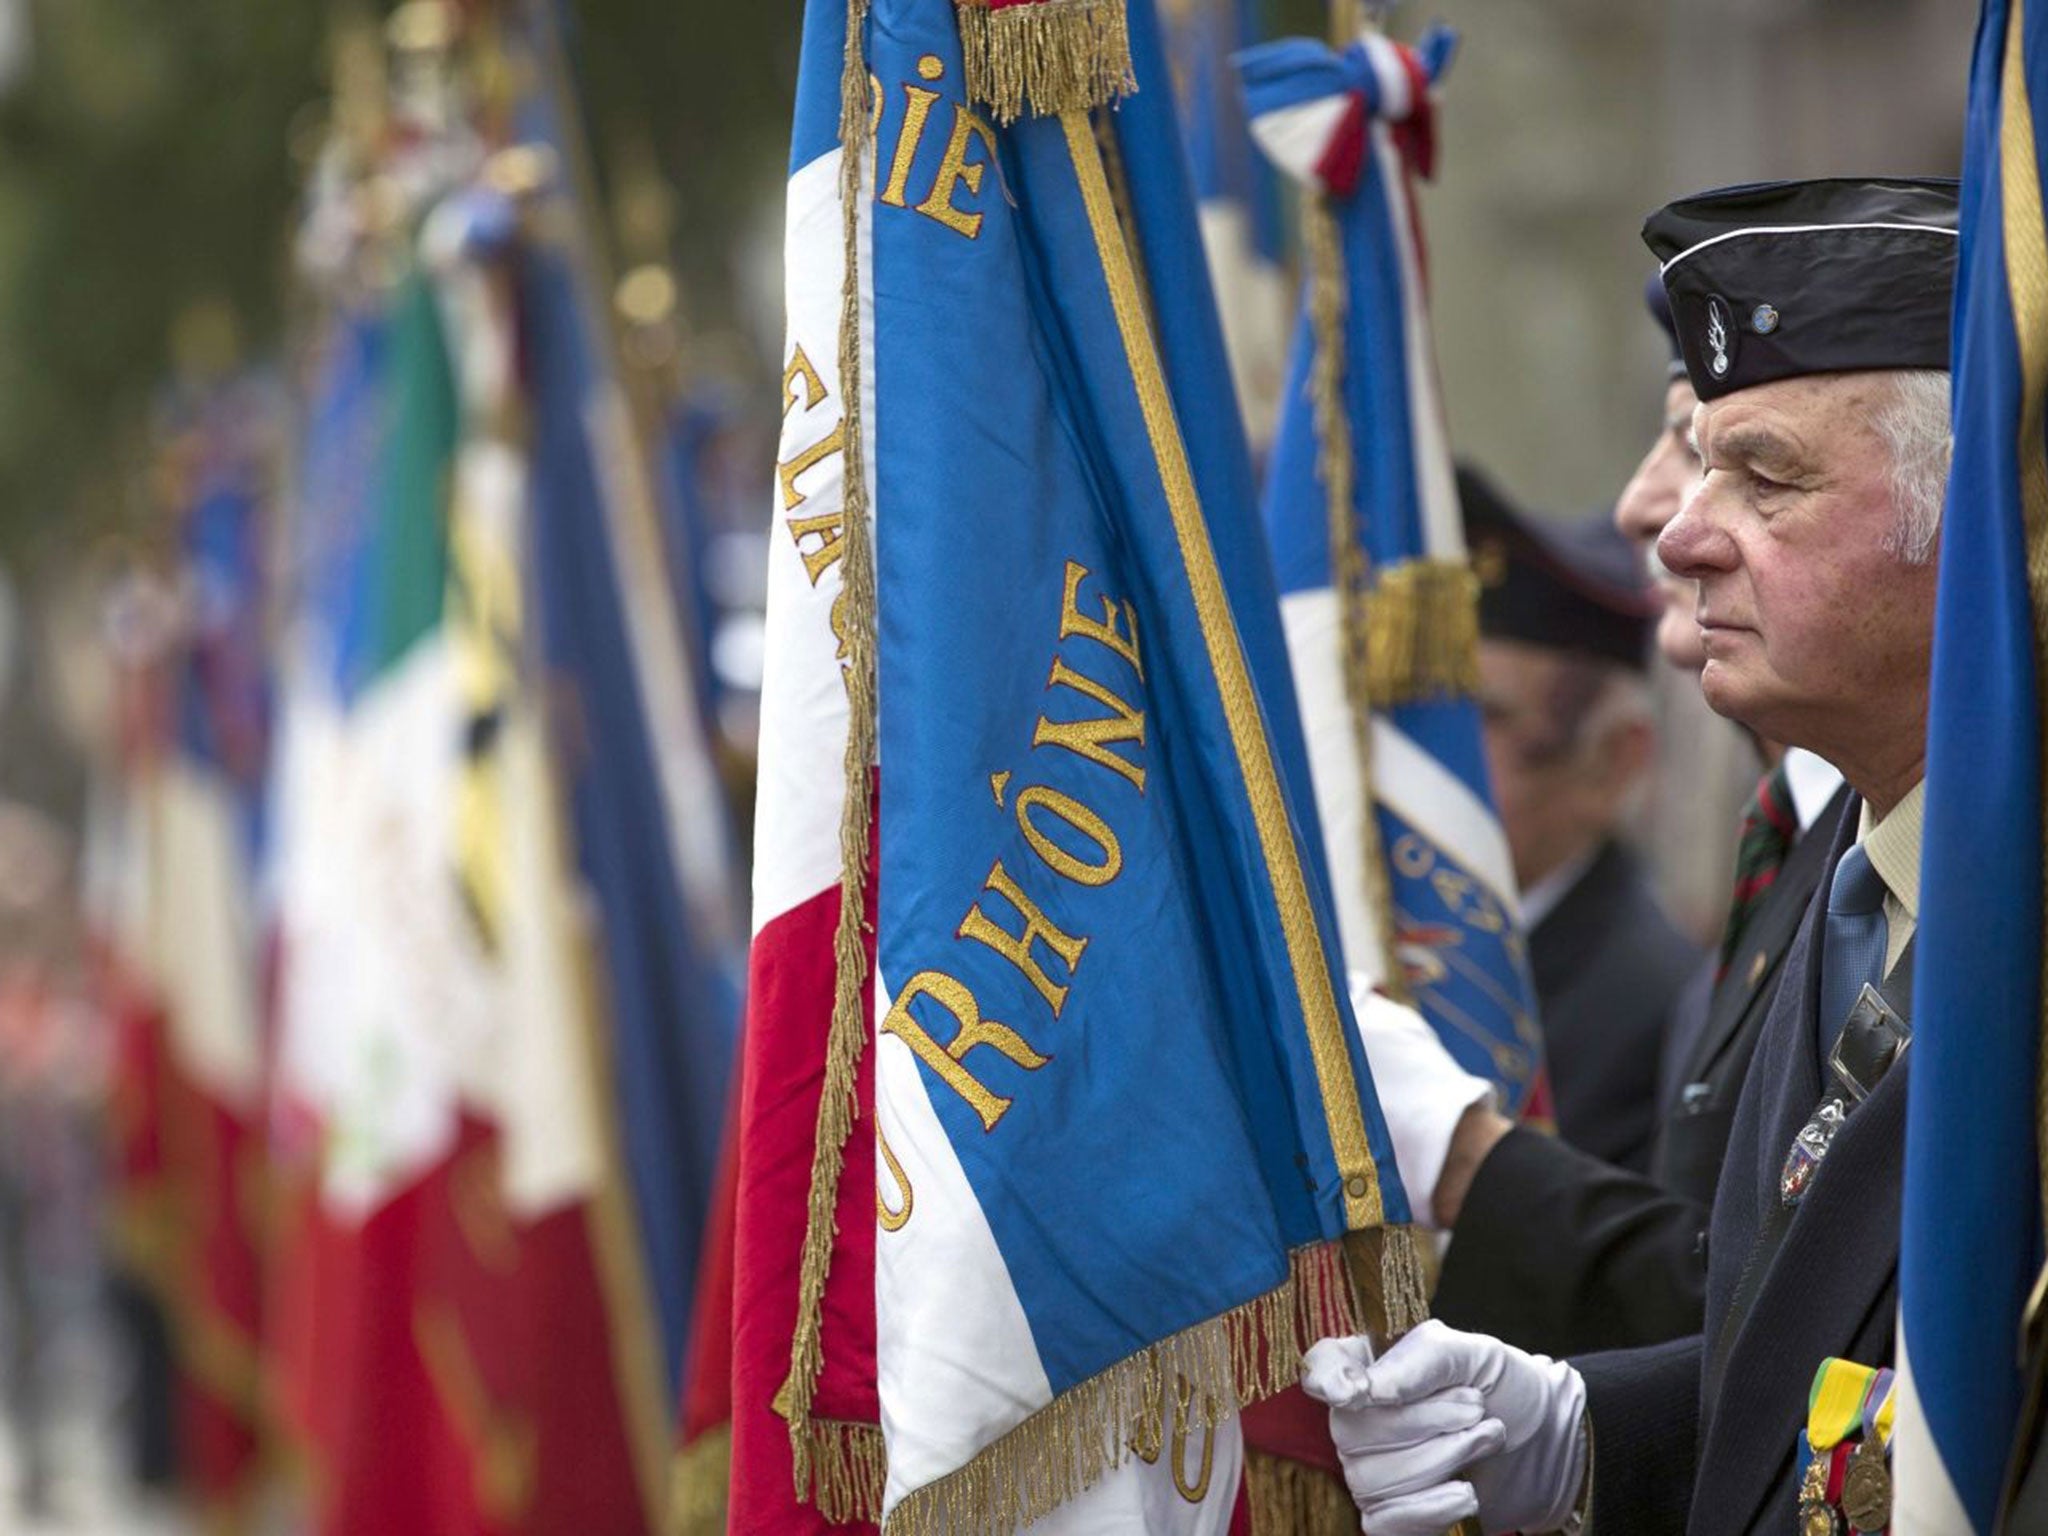 Veterans parade in Lyon on the eve of 14 July celebrations, which have been marred by a row over foreign delegates